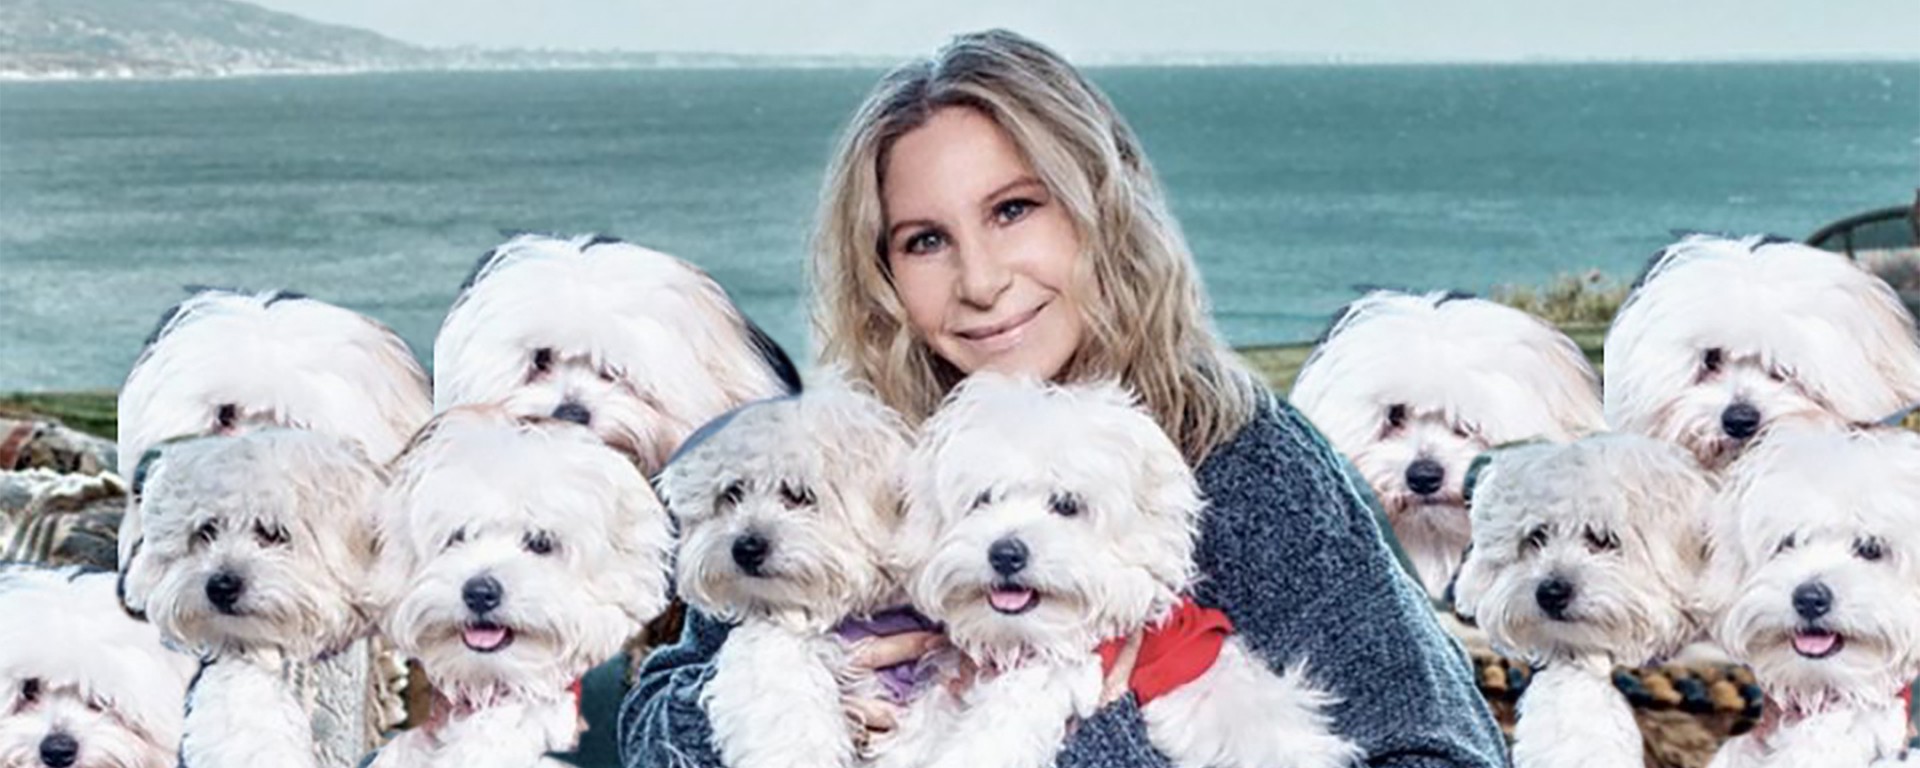 Barbra Streisand holding, and surrounded by, multiple copies of the same dog.